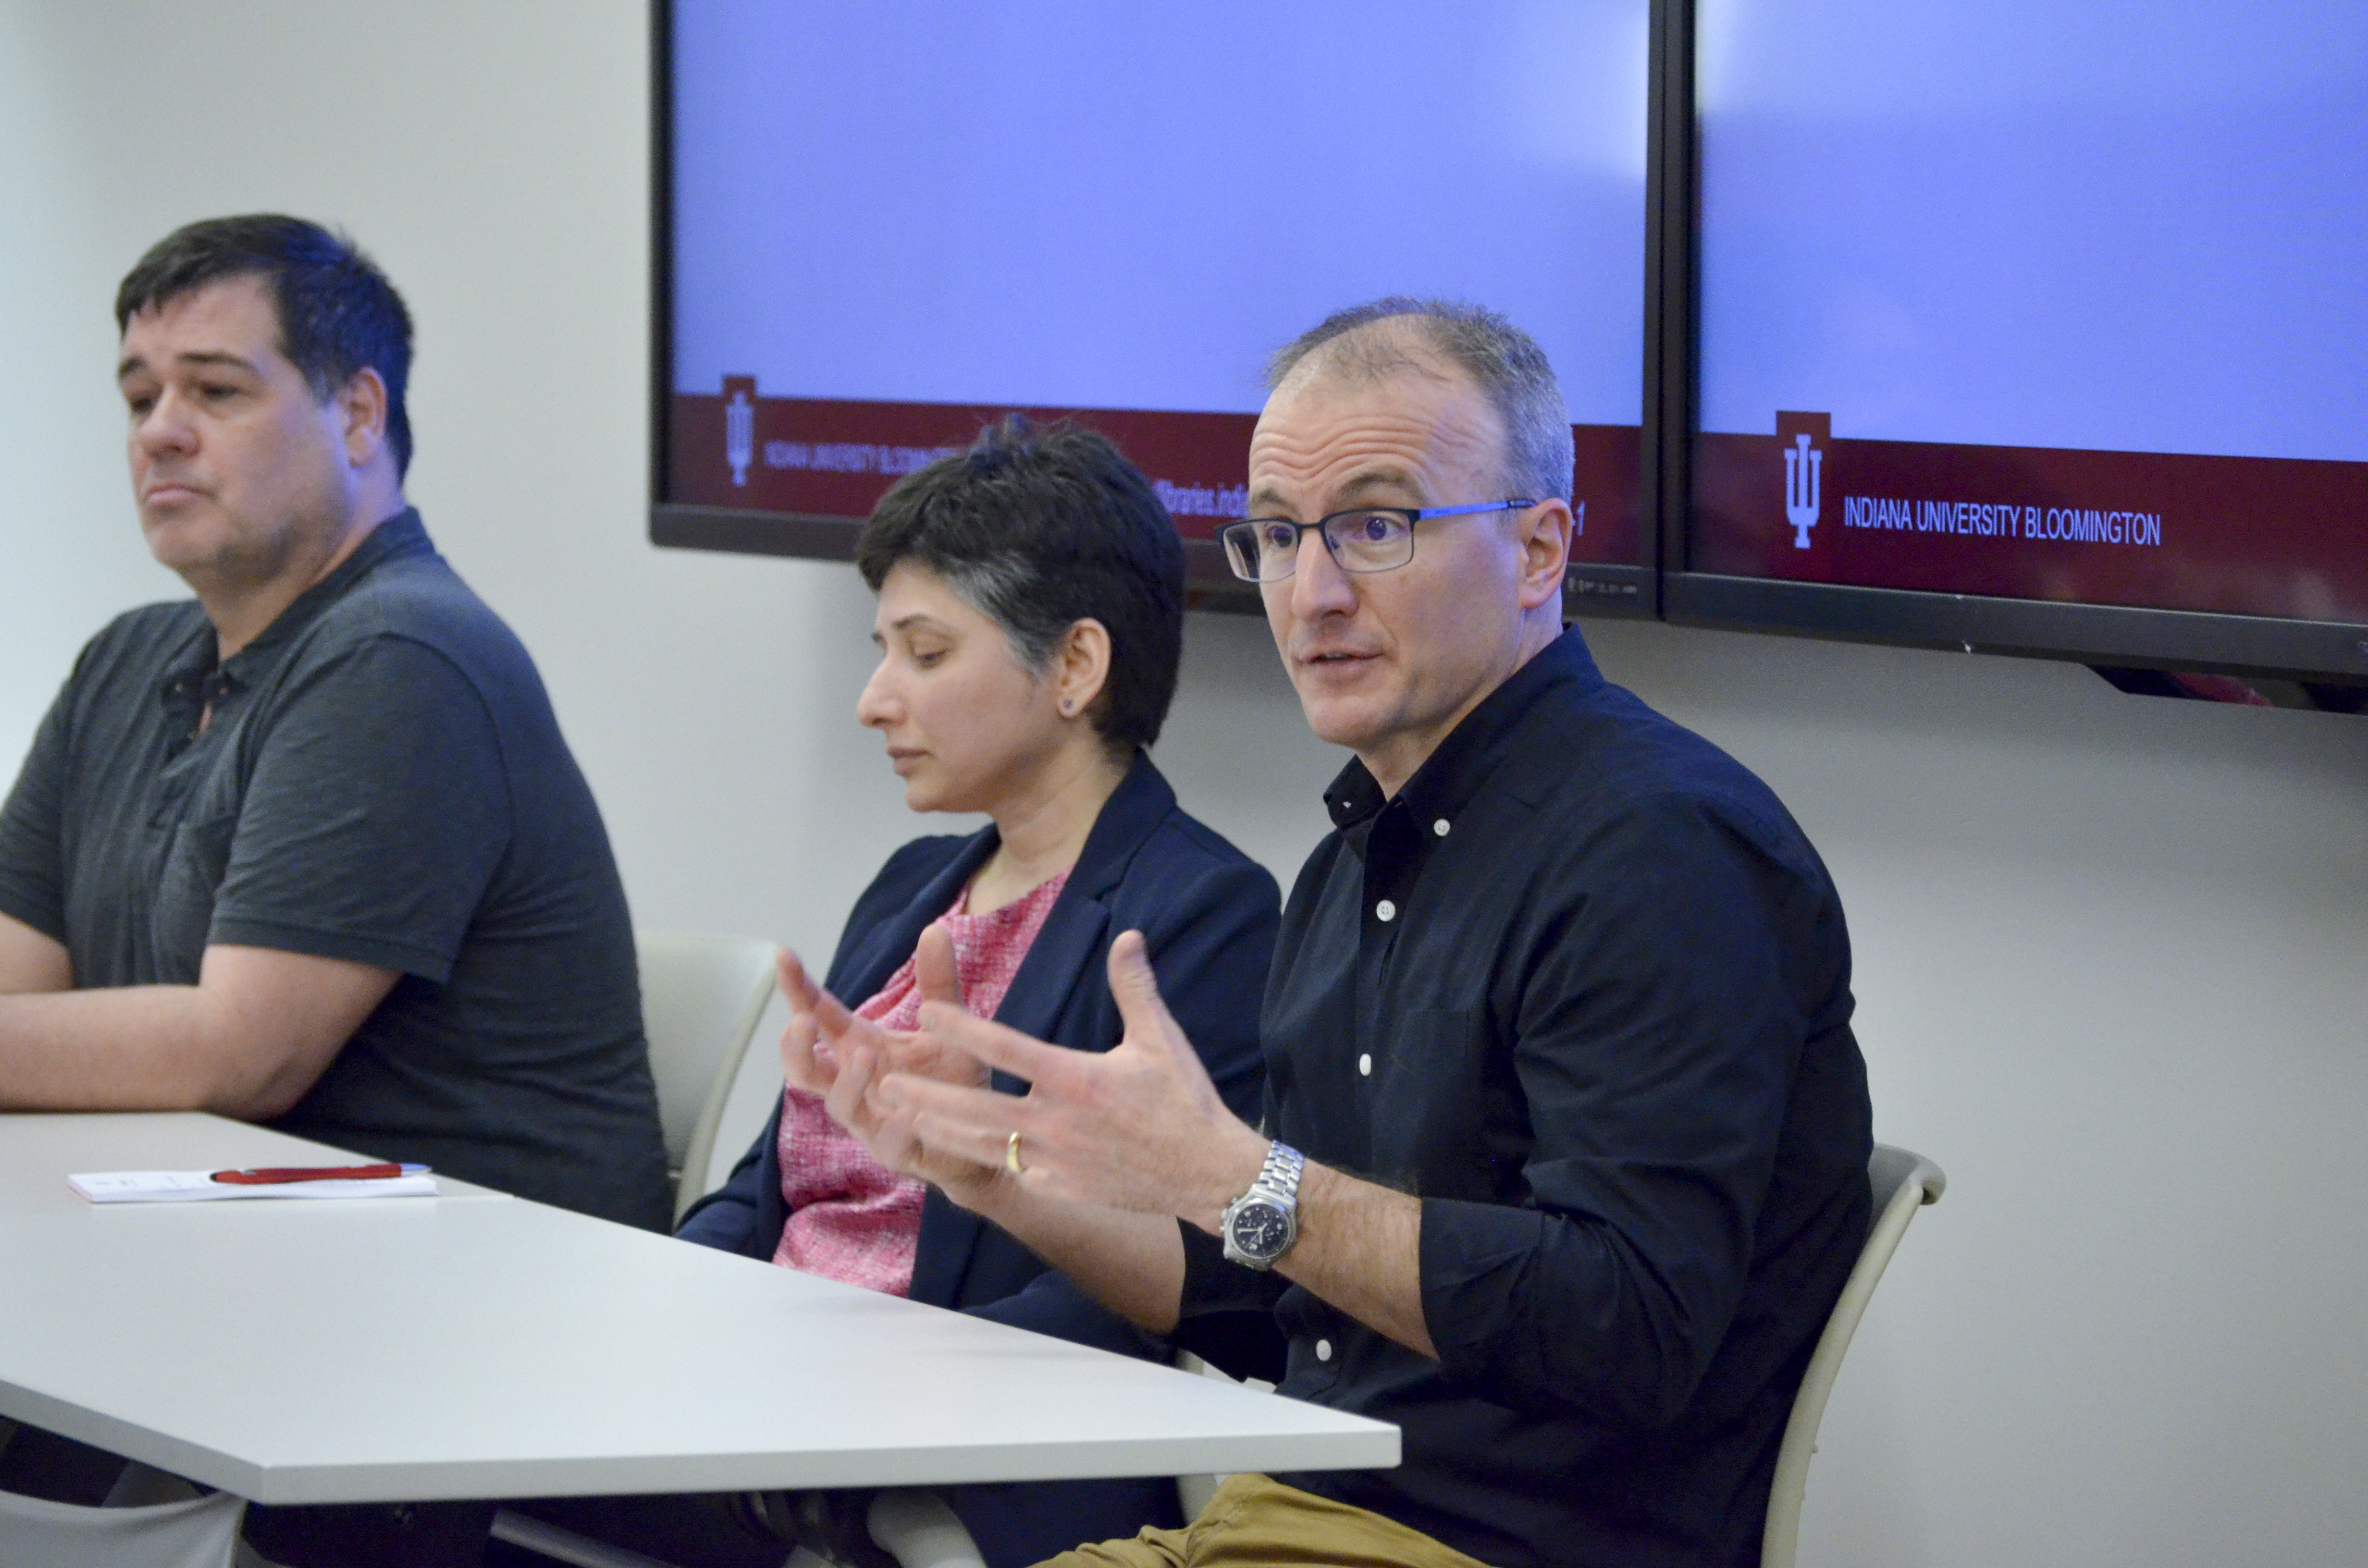 Image of the three fellowship panelists sitting at a table at the front of the room. Rick Hullinger (right) is speaking and gesturing with his hands.